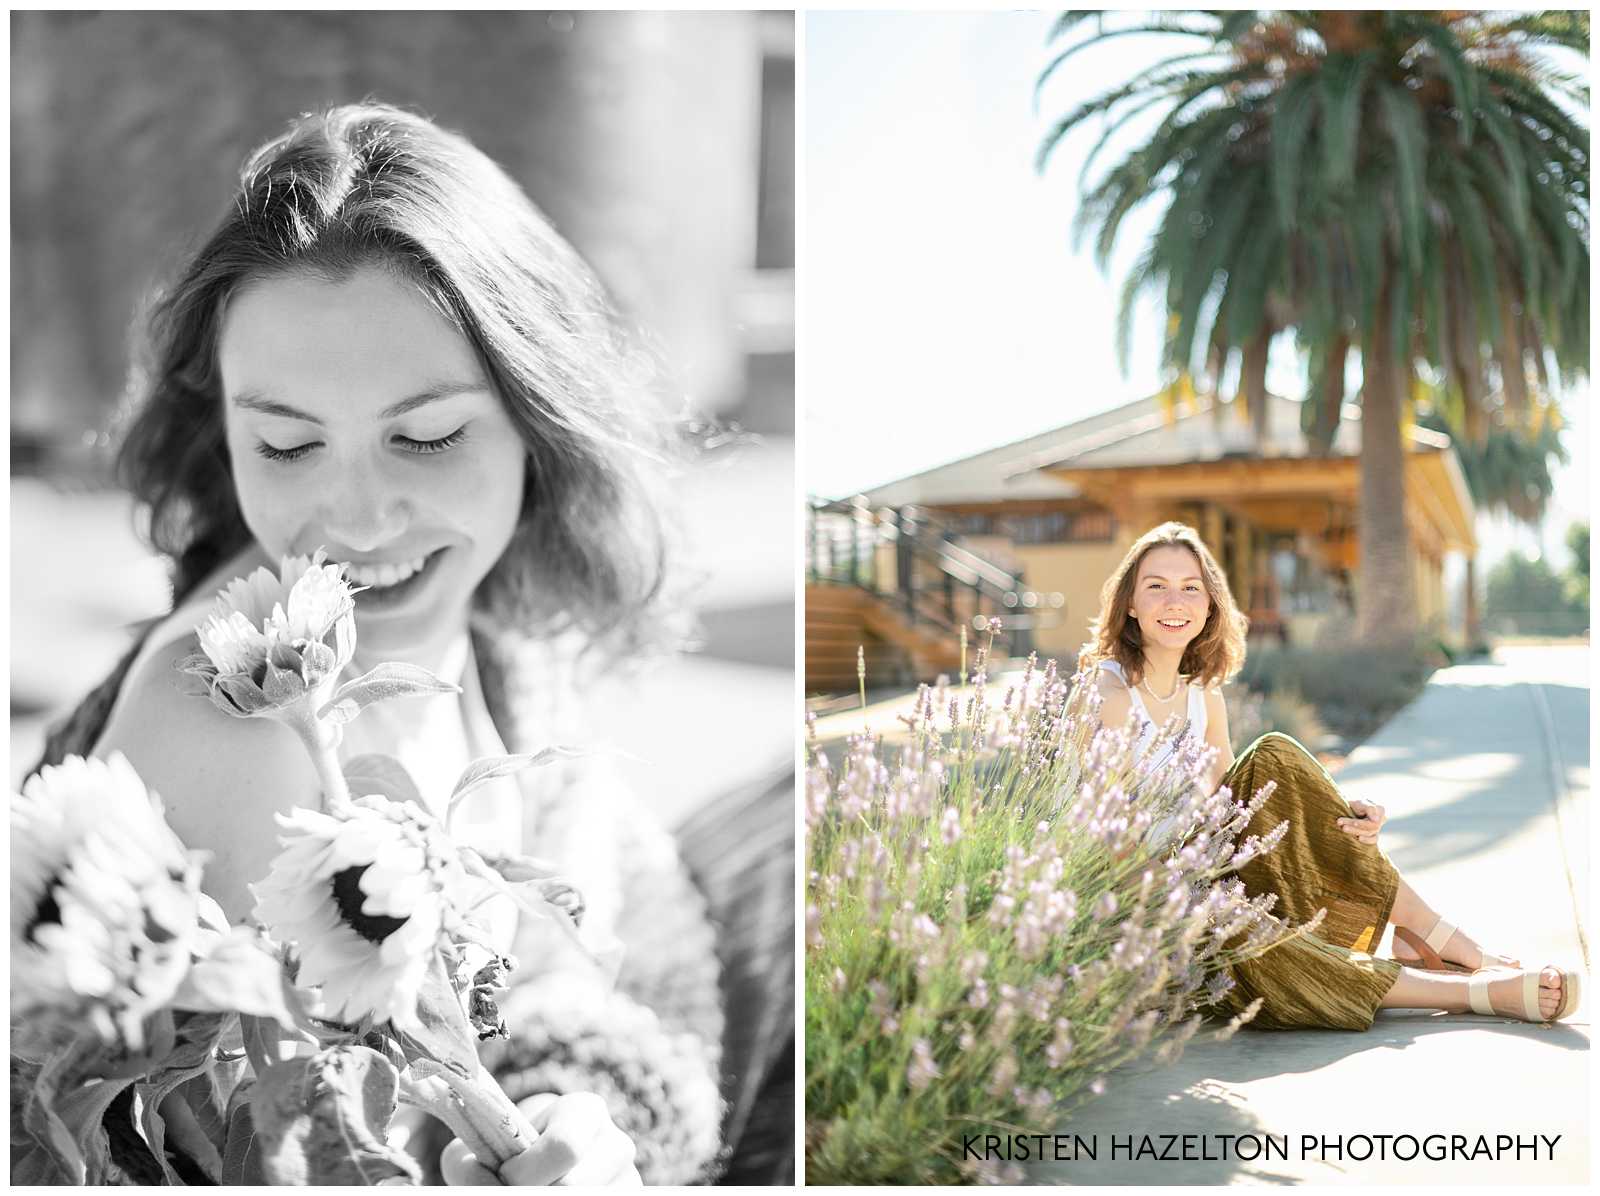 Senior portraits at the Niles Train Plaza with sunflowers, lavender and palm trees.